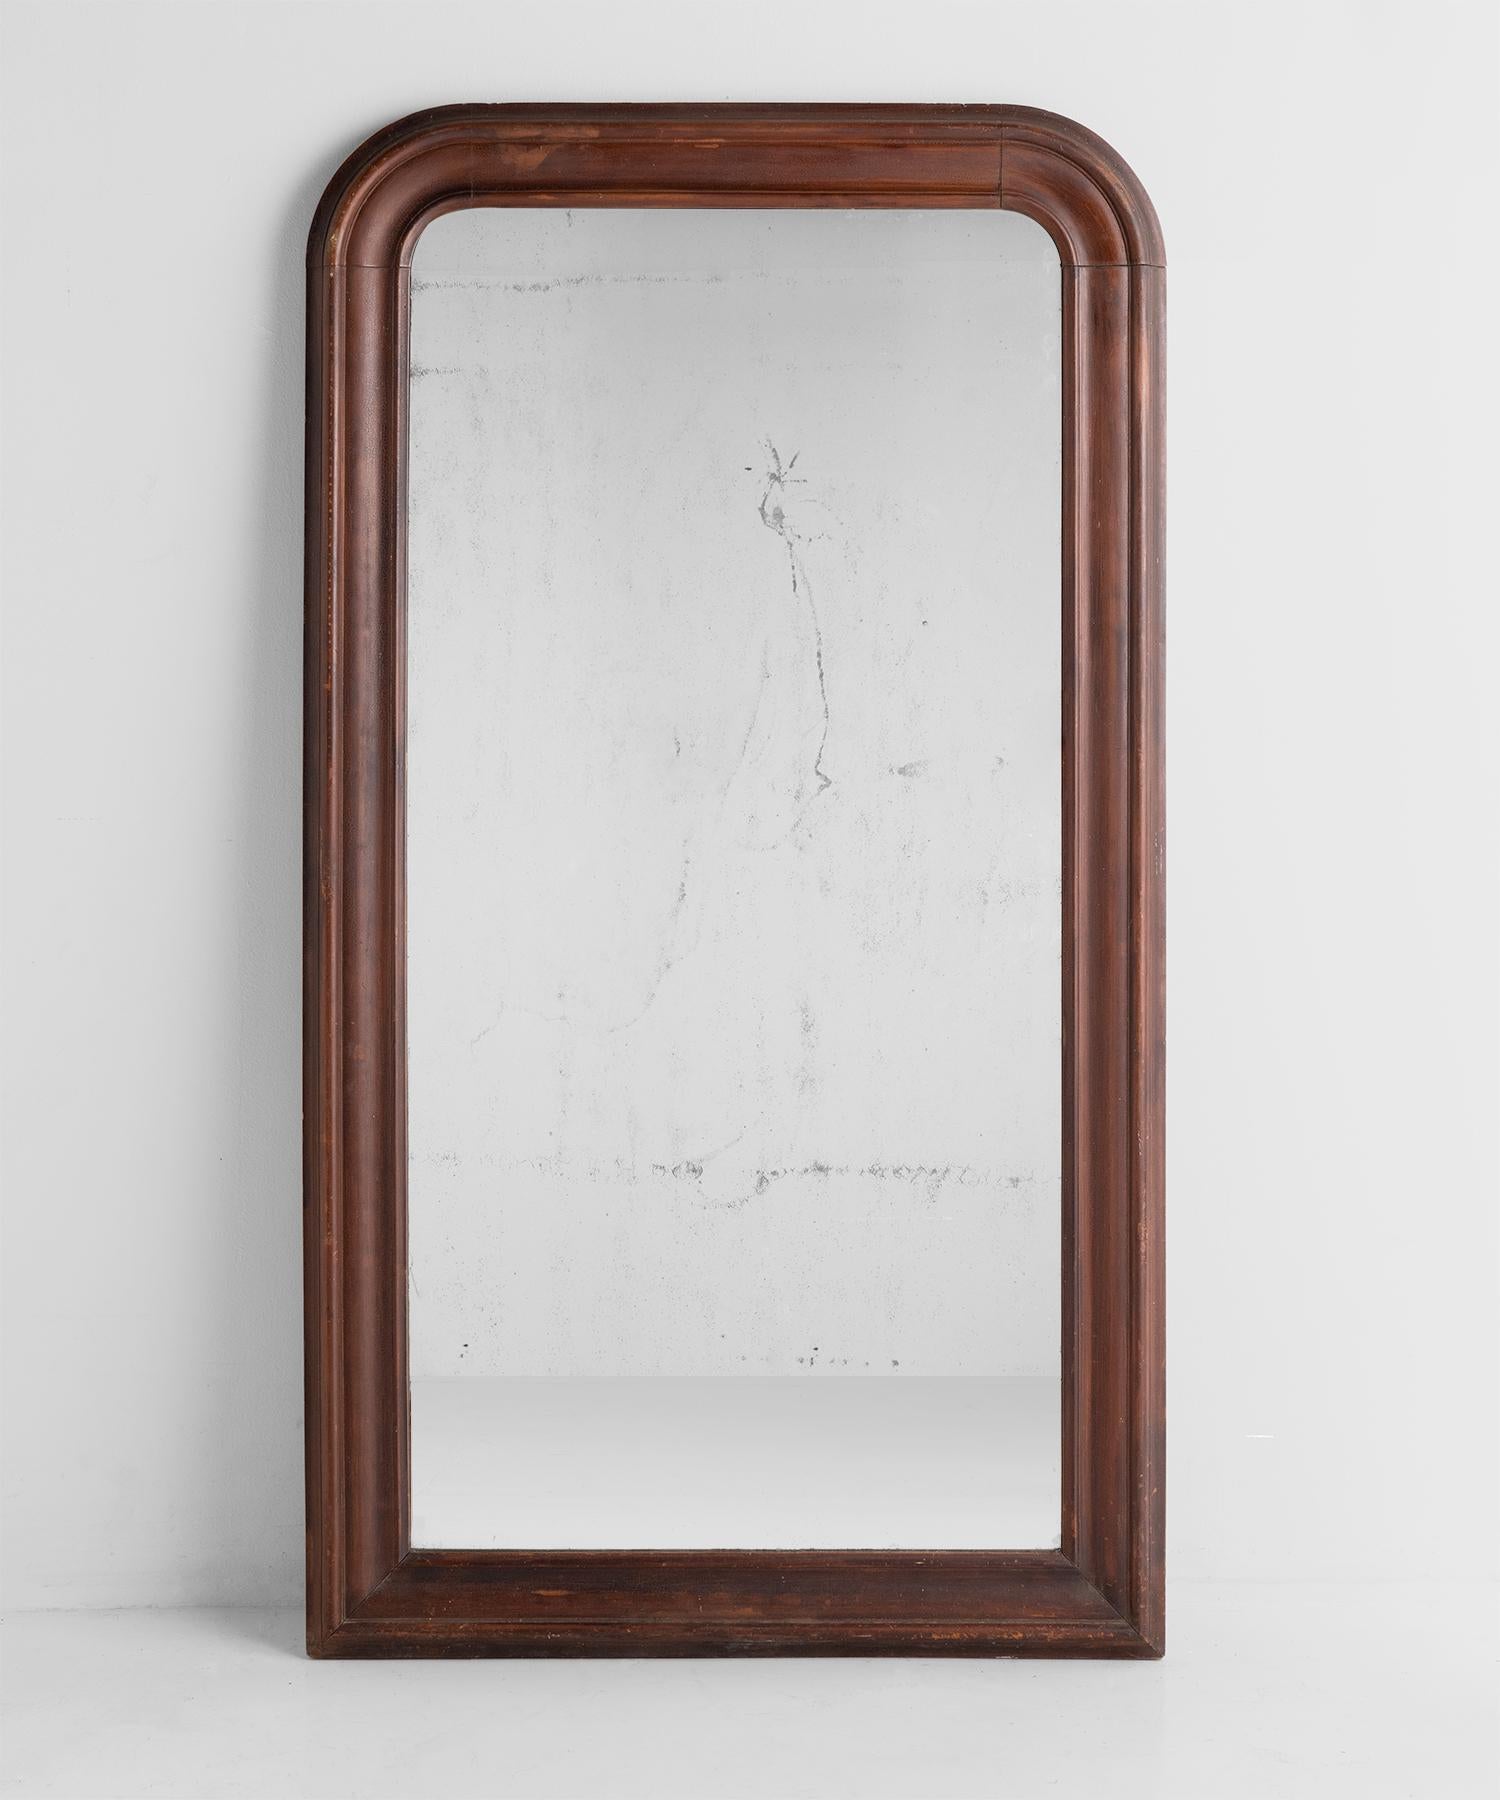 Victorian mantle mirror, circa 1900

Elegant painted wooden frame with original glass plate.